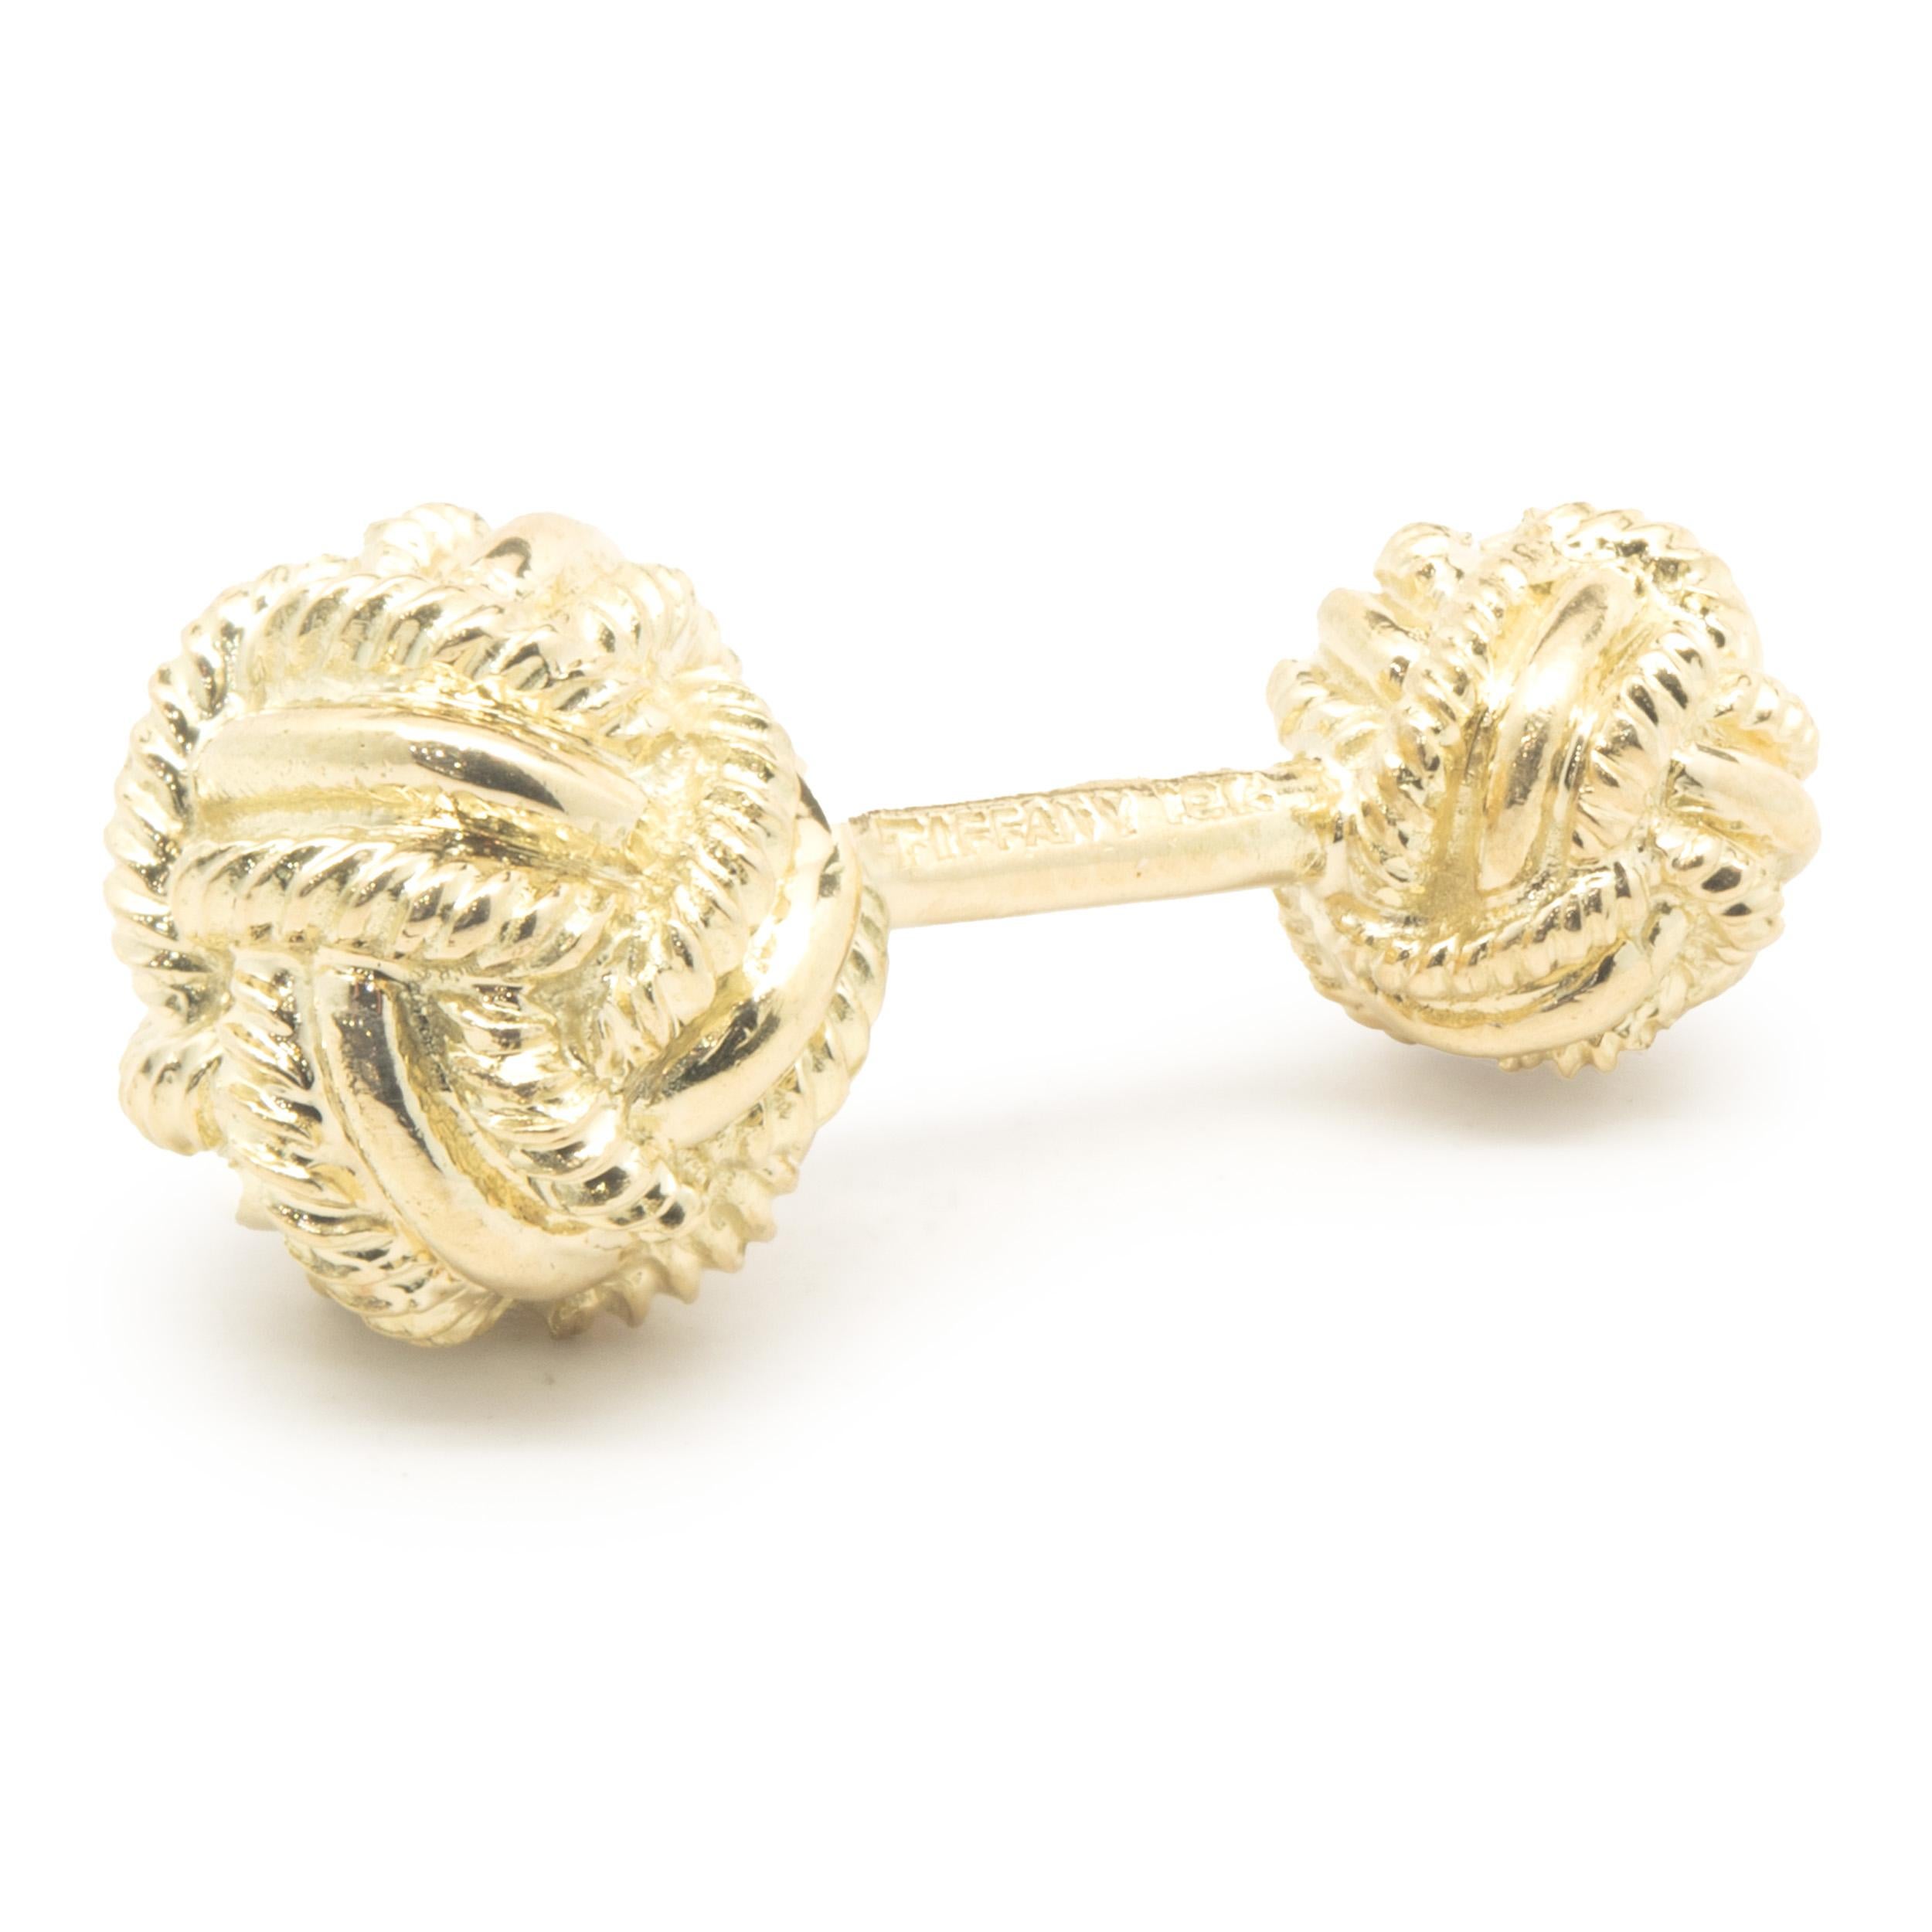 Designer: Tiffany & Co. / Schlumberger
Material: 18K yellow gold
Dimensions: cufflink measures 27mm in length
Weight: 9.00 grams